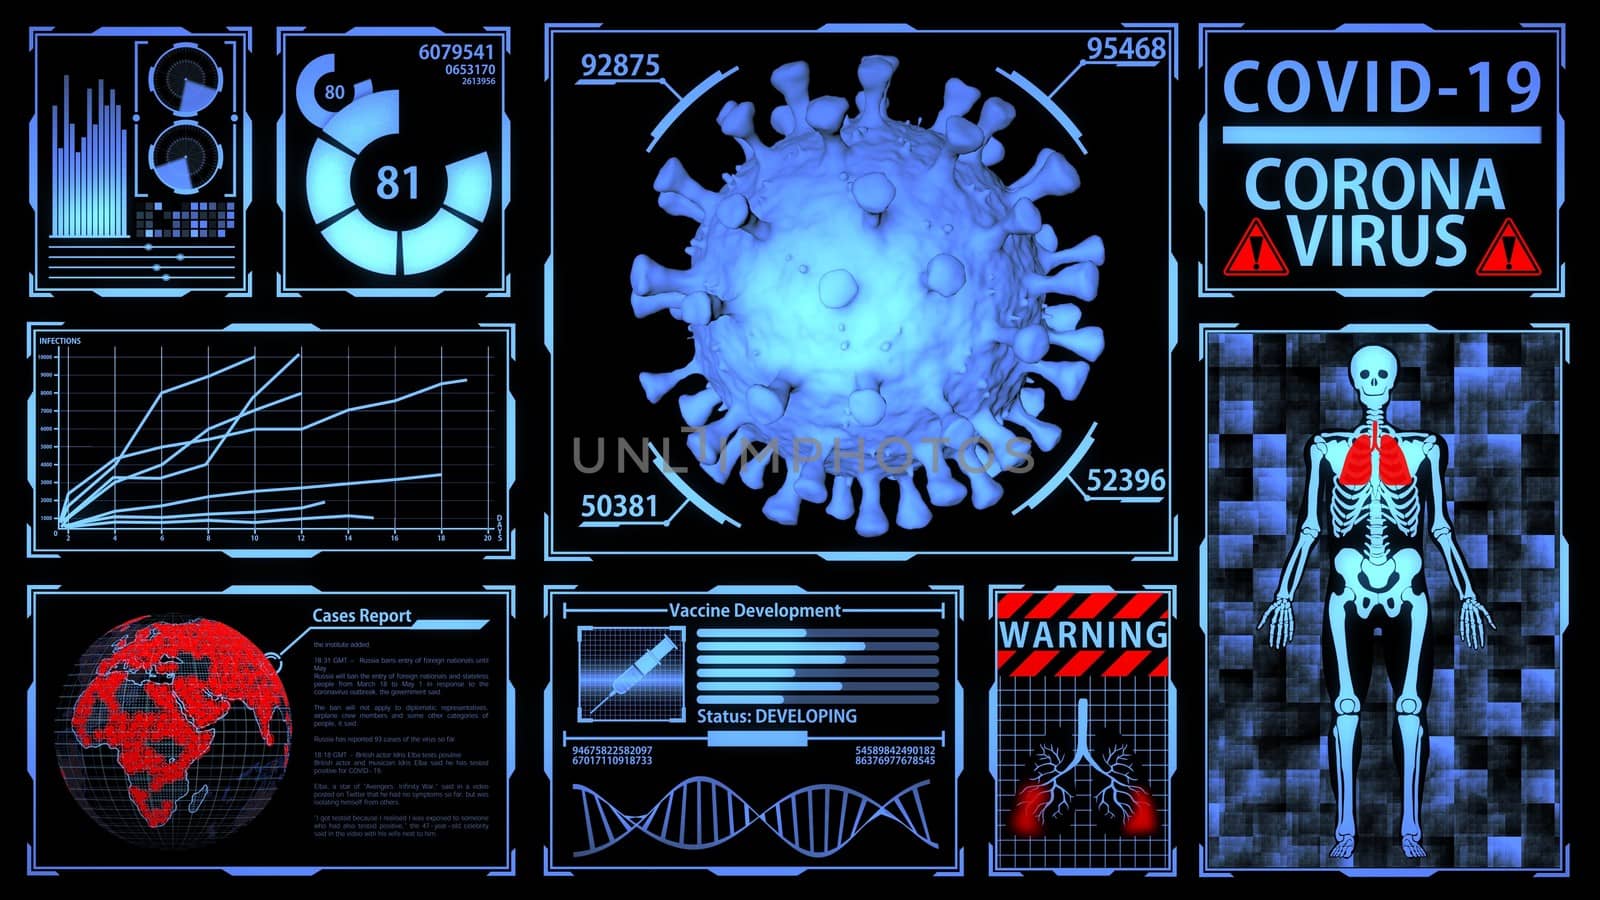 Coronavirus/Covid-19 3D Model in Futuristic Digital Medical HUD with Epidemic Detection, Vaccine Development process and Worldwide Cases Report Background Ver.1 by ariya23156